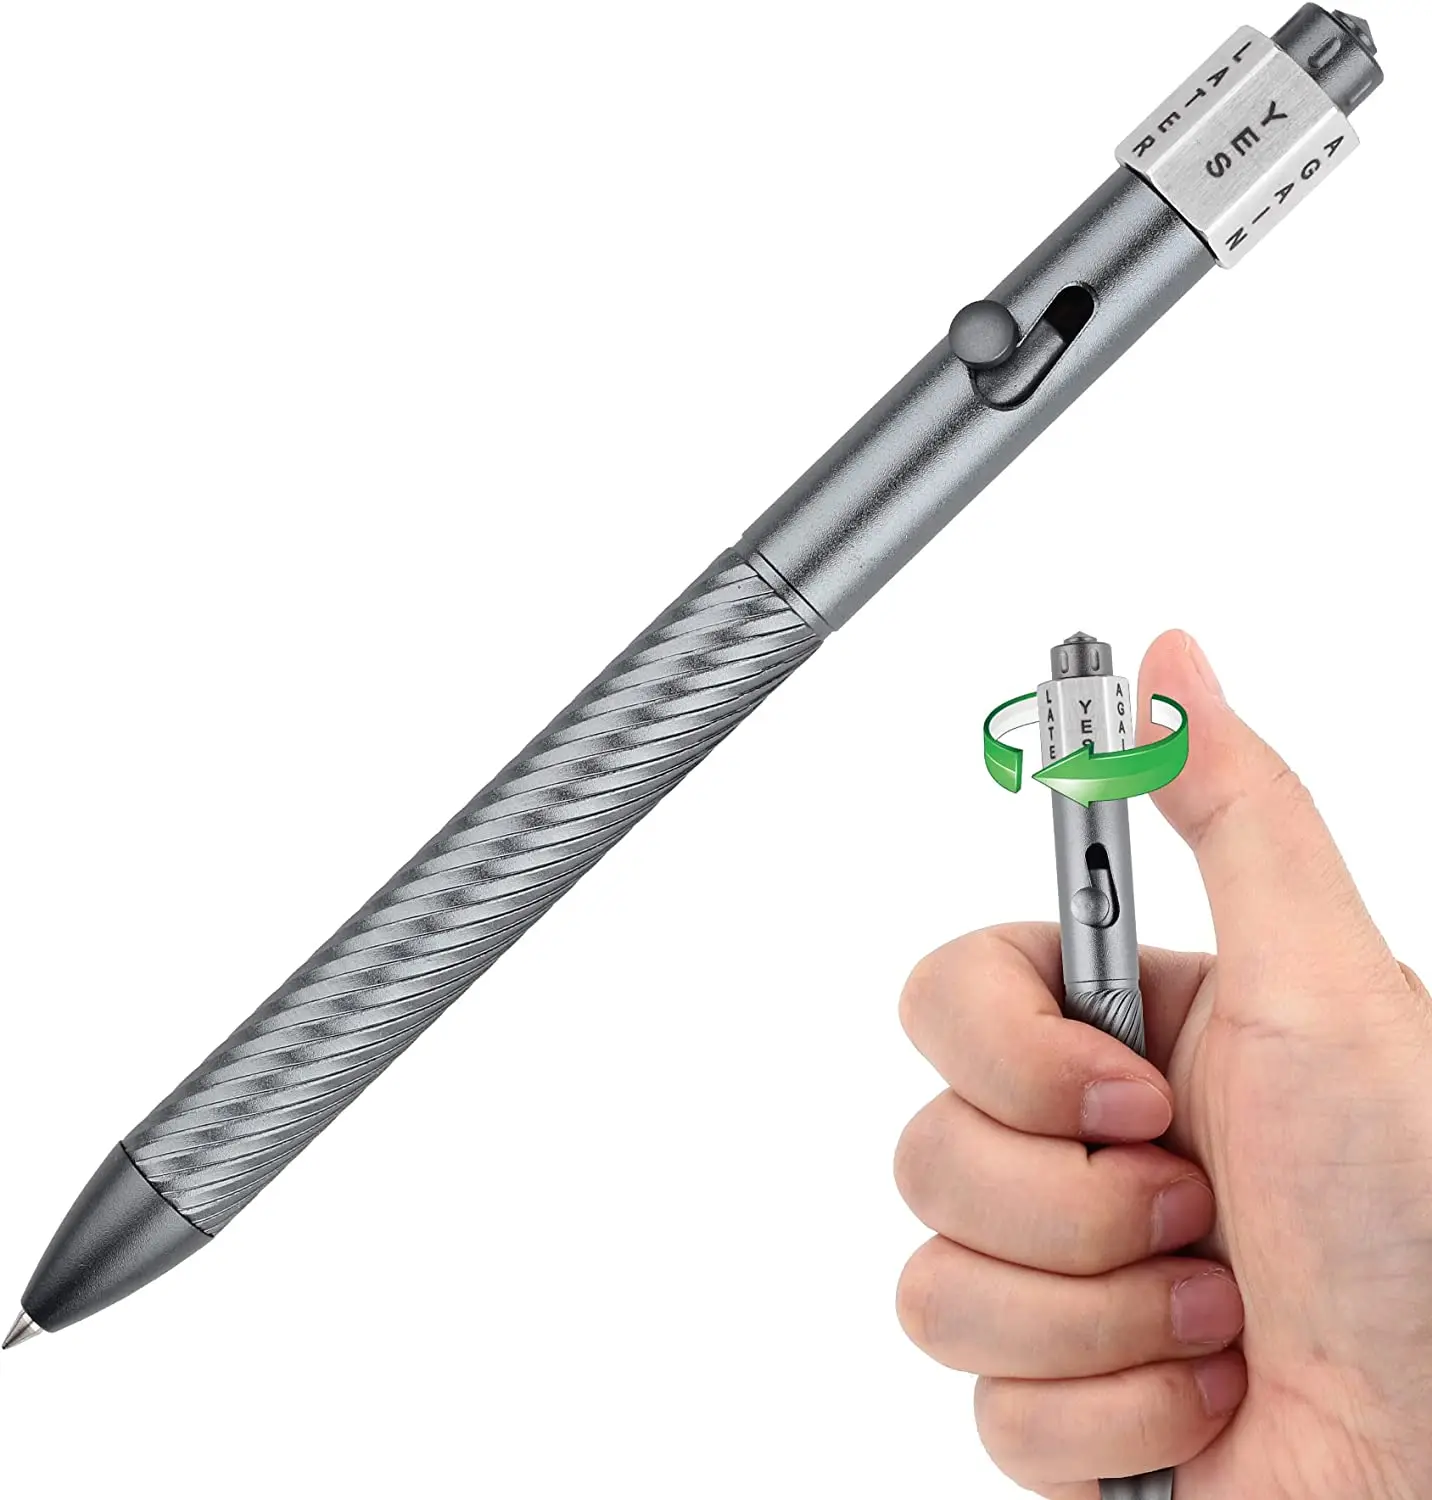 

SMOOTHERPRO Fidget Bolt Action Pen Decision Maker Compatible with Pilot G2 Refill Ball Pen Stress Relief Anxiety Reducer